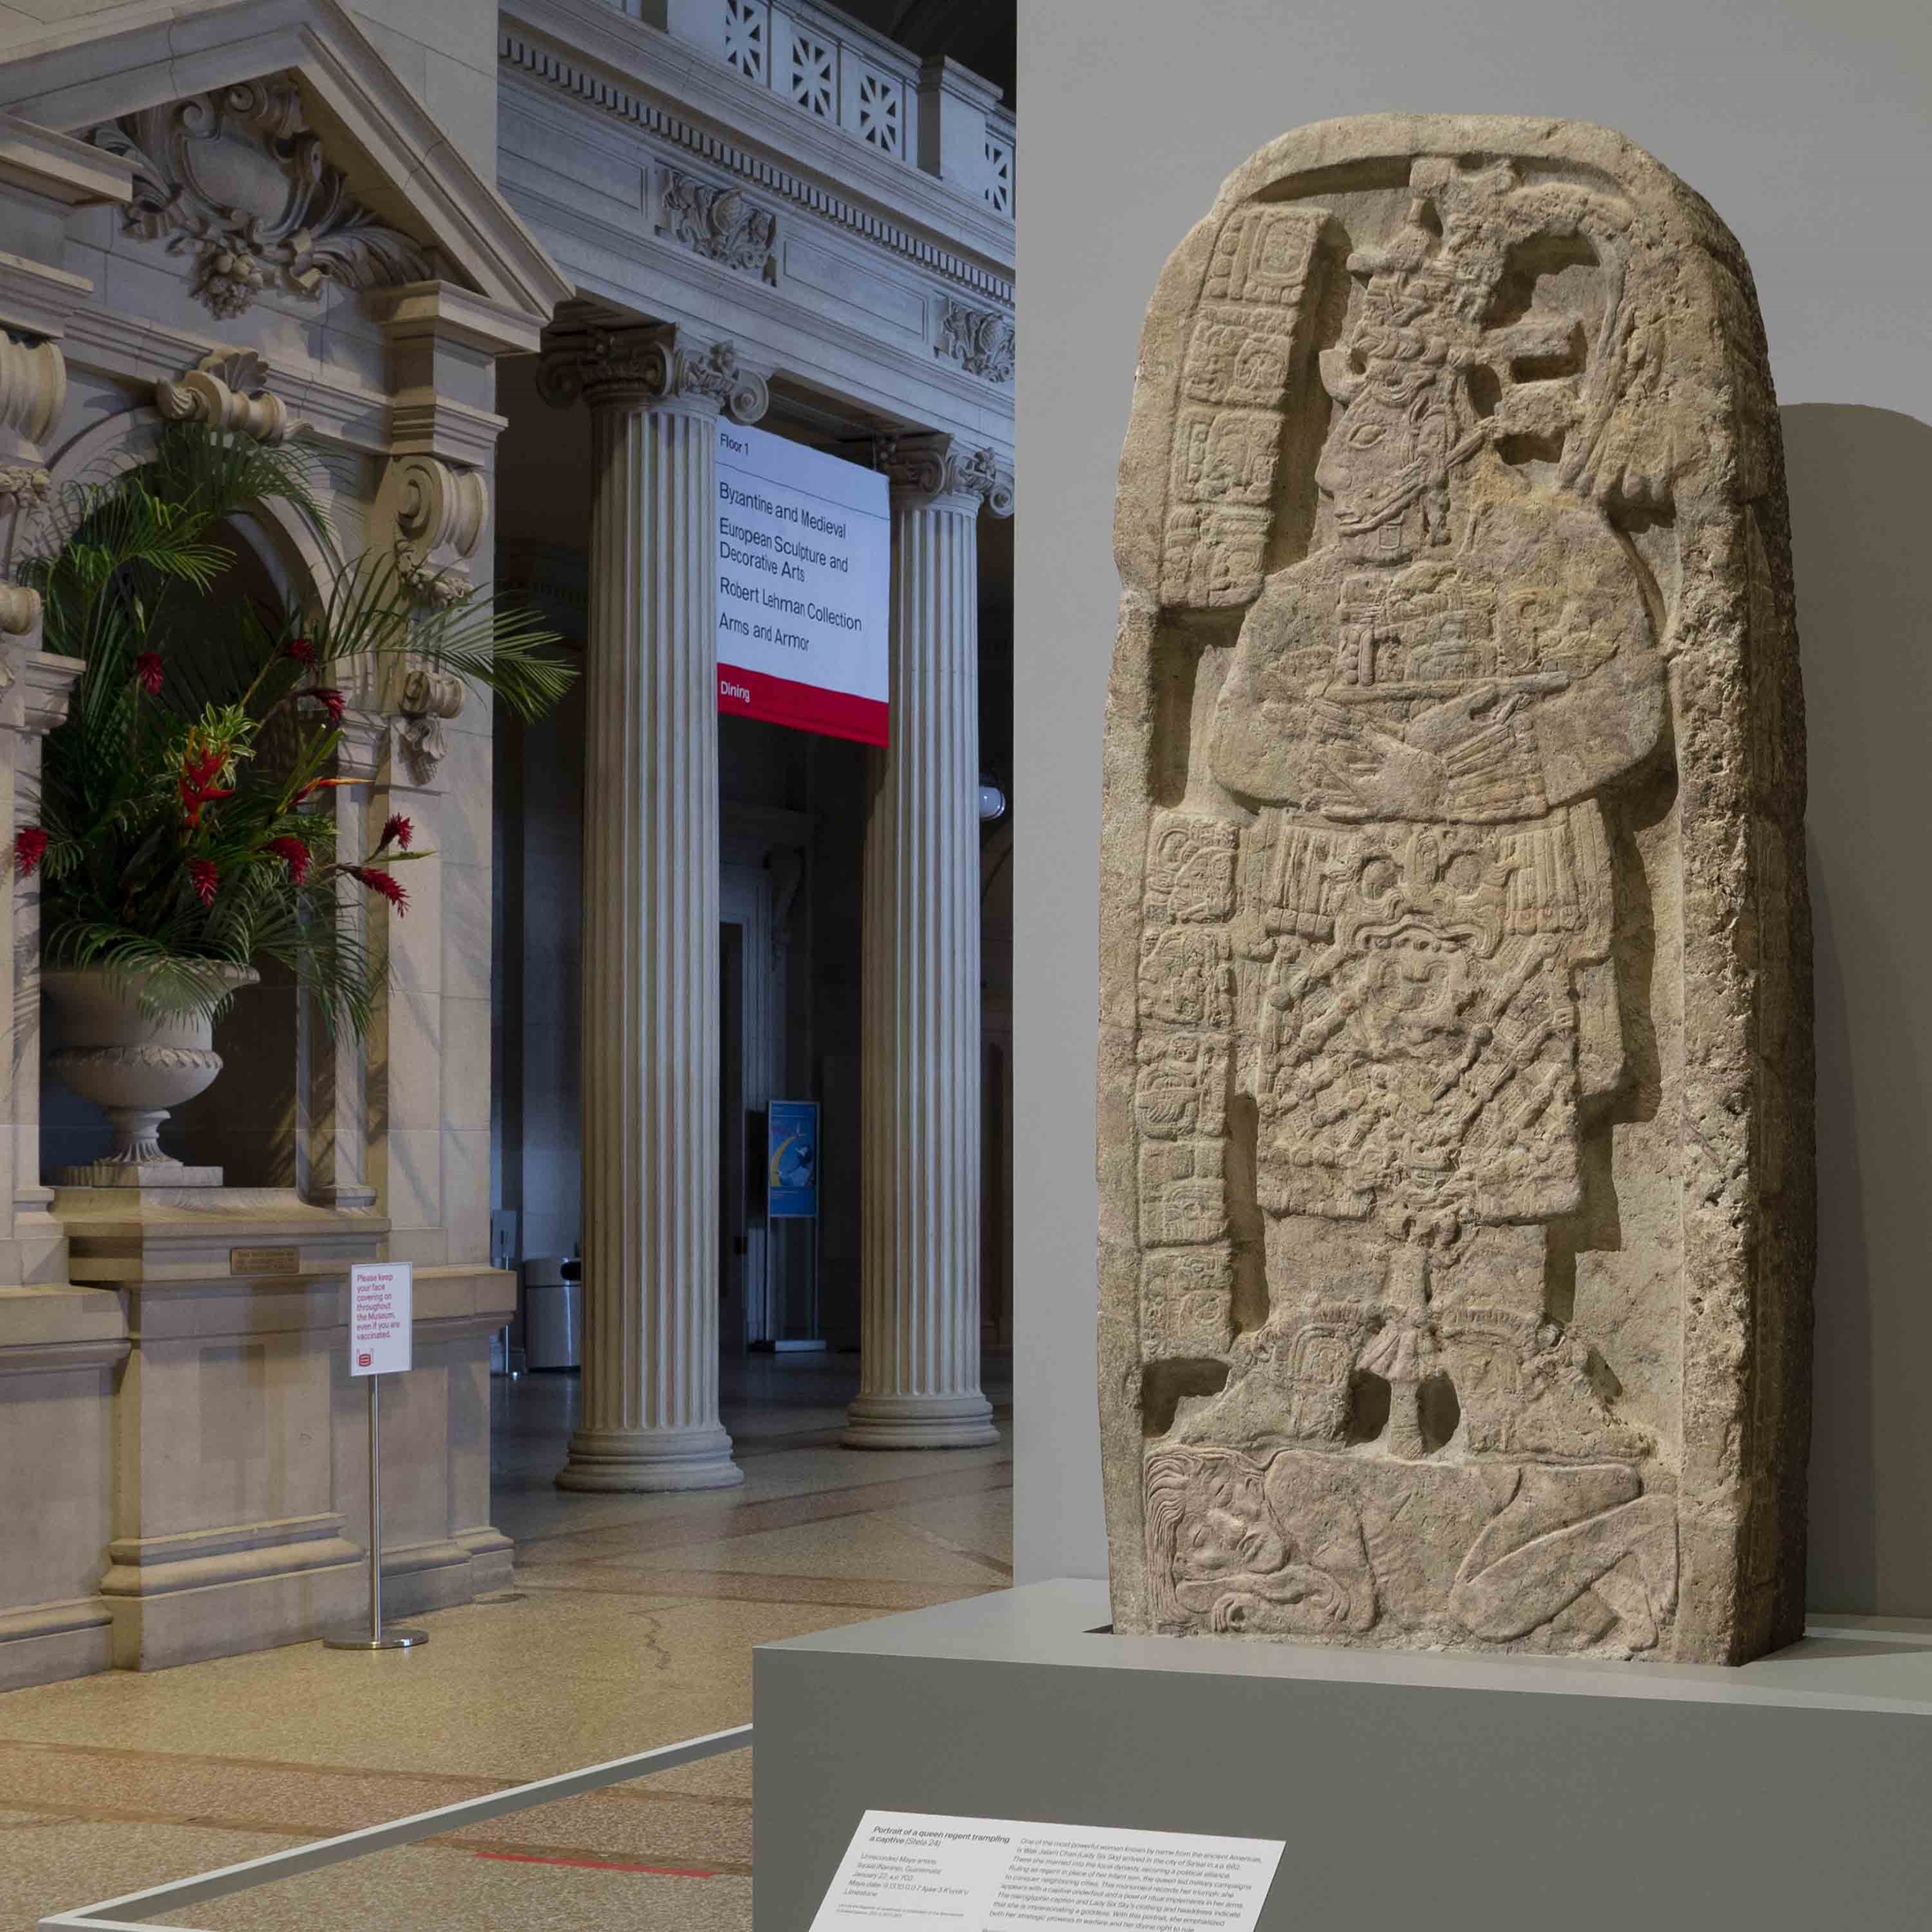 Portrait of a queen regent trampling a captive carved into a stelae, or large decorated stone slab, of Maya origin. The sculpture is installed in the Great Hall at the Museum.